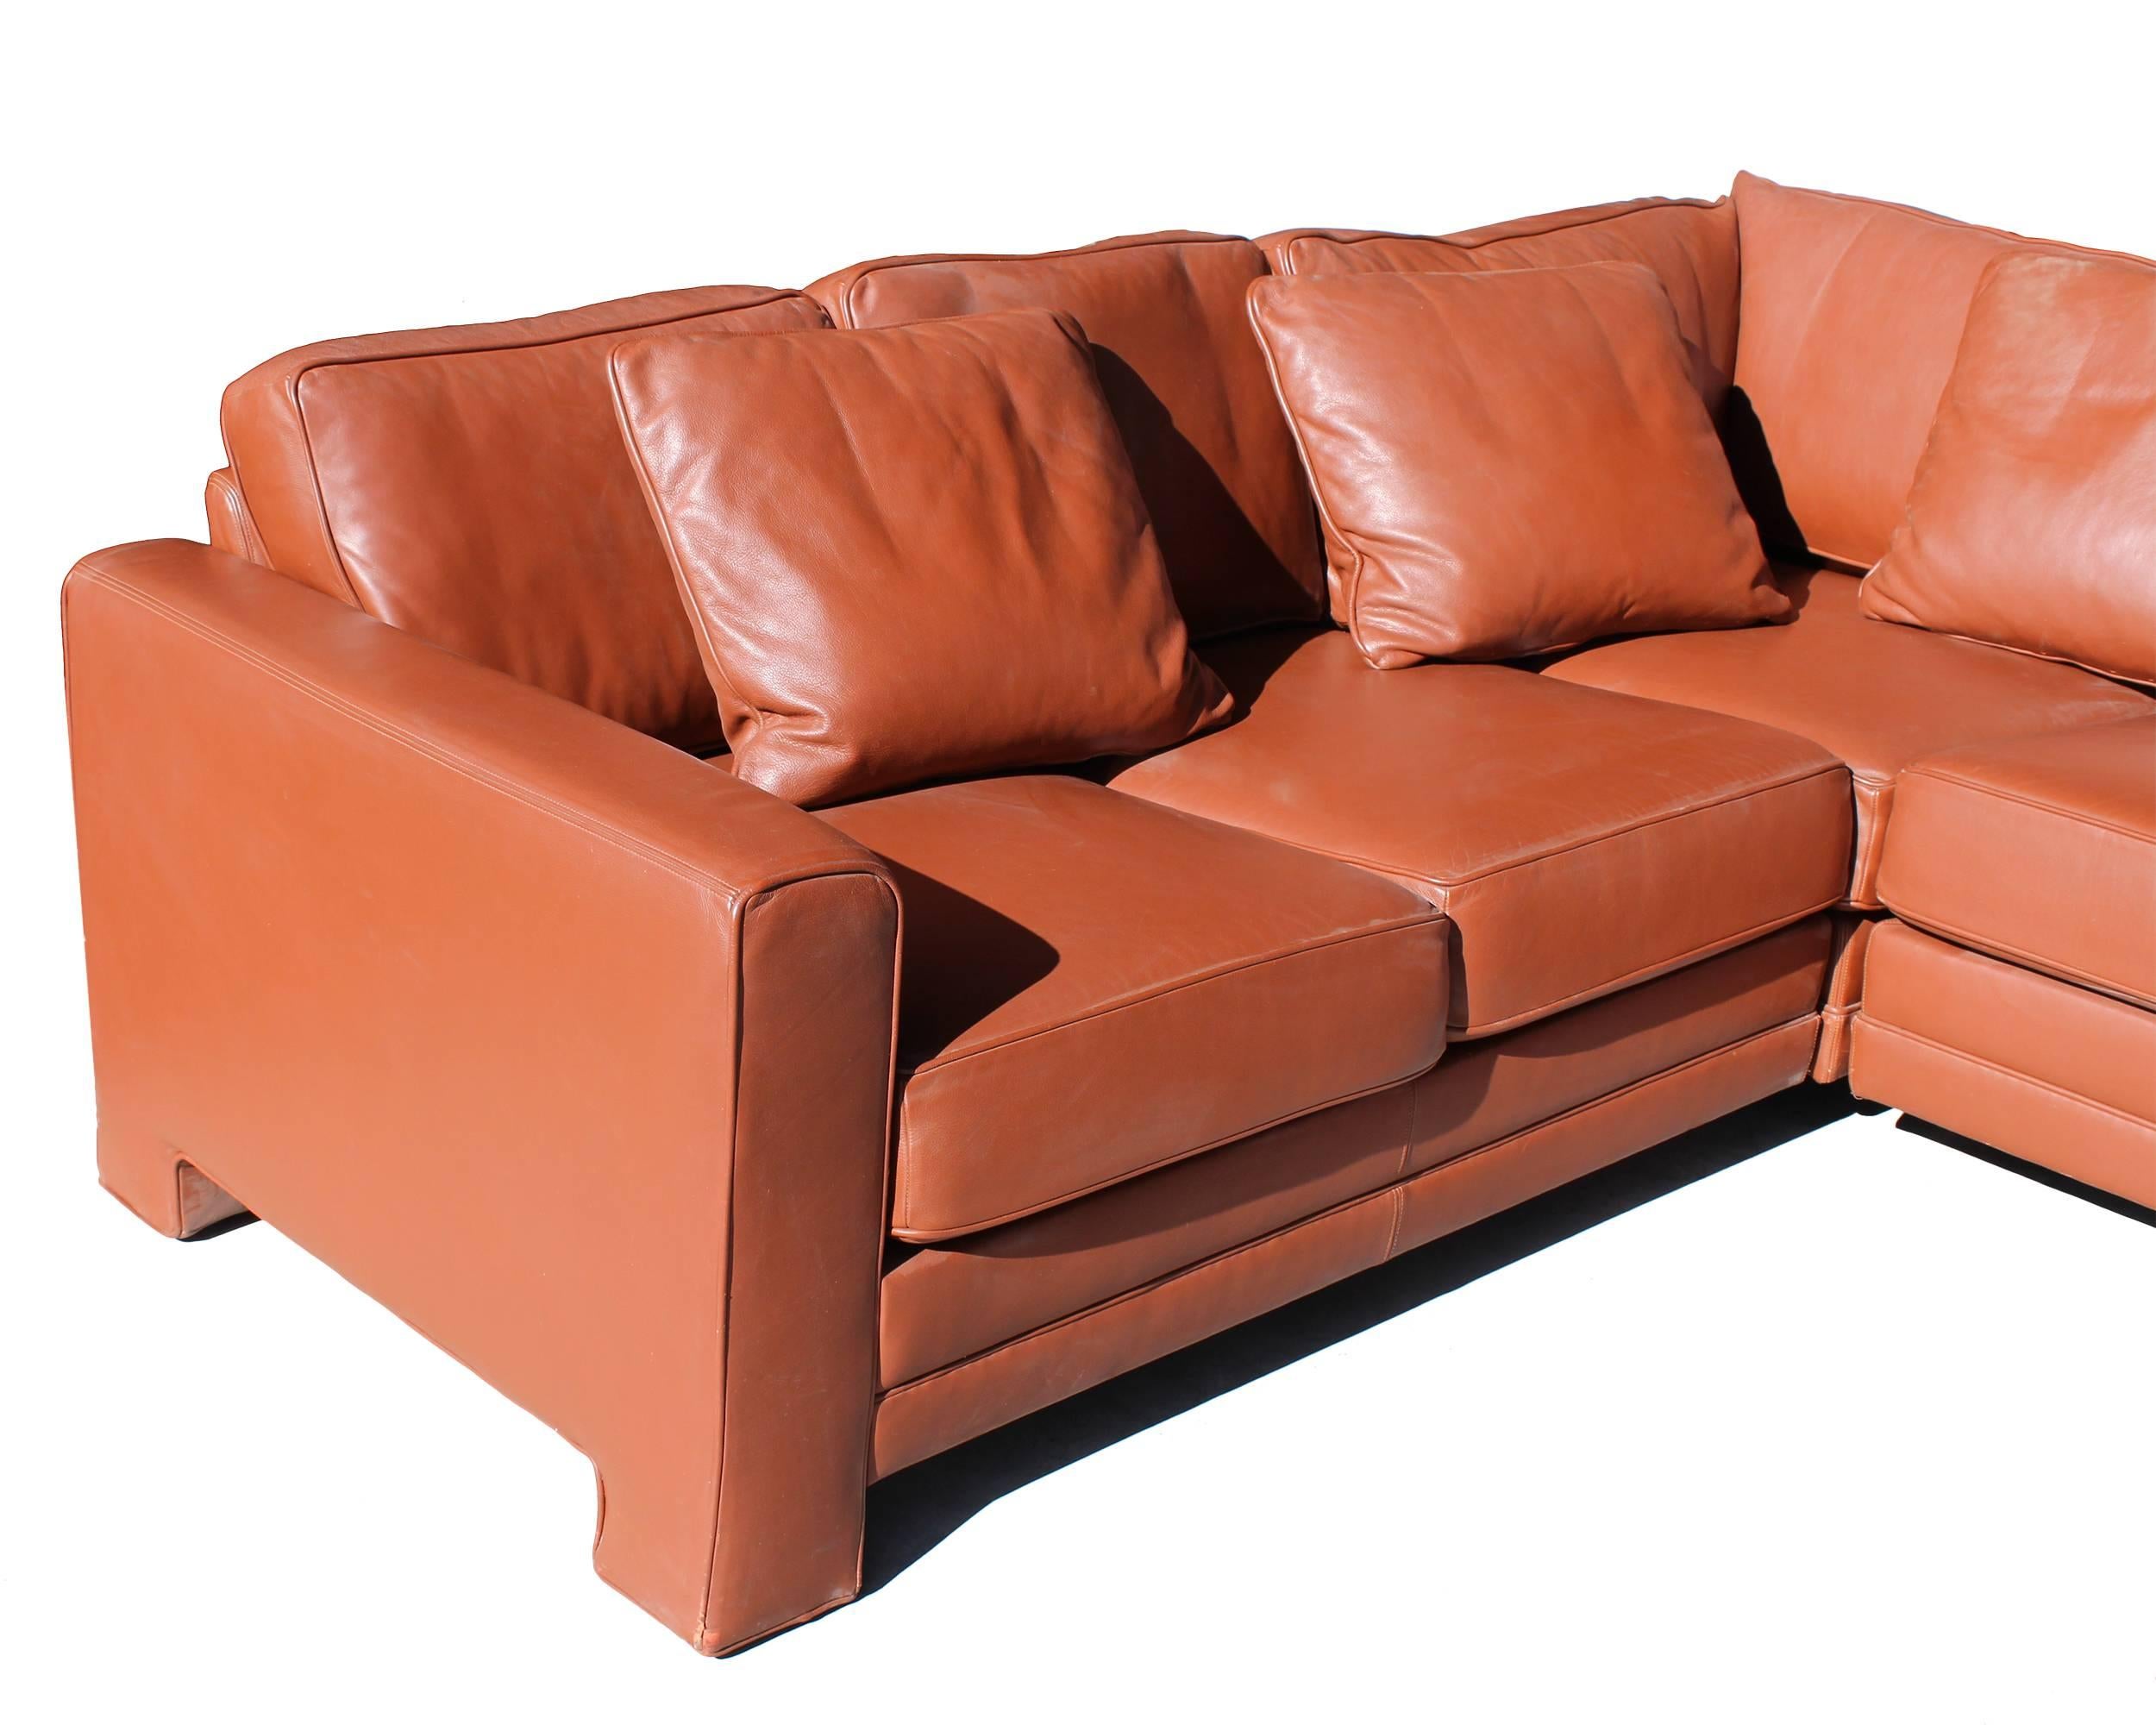 1990 Hans Kaufeld leather sofa
Renowned Austrian furniture maker Hans Kaufeld sofa. Modular furniture in red leather allowing for different combinations.